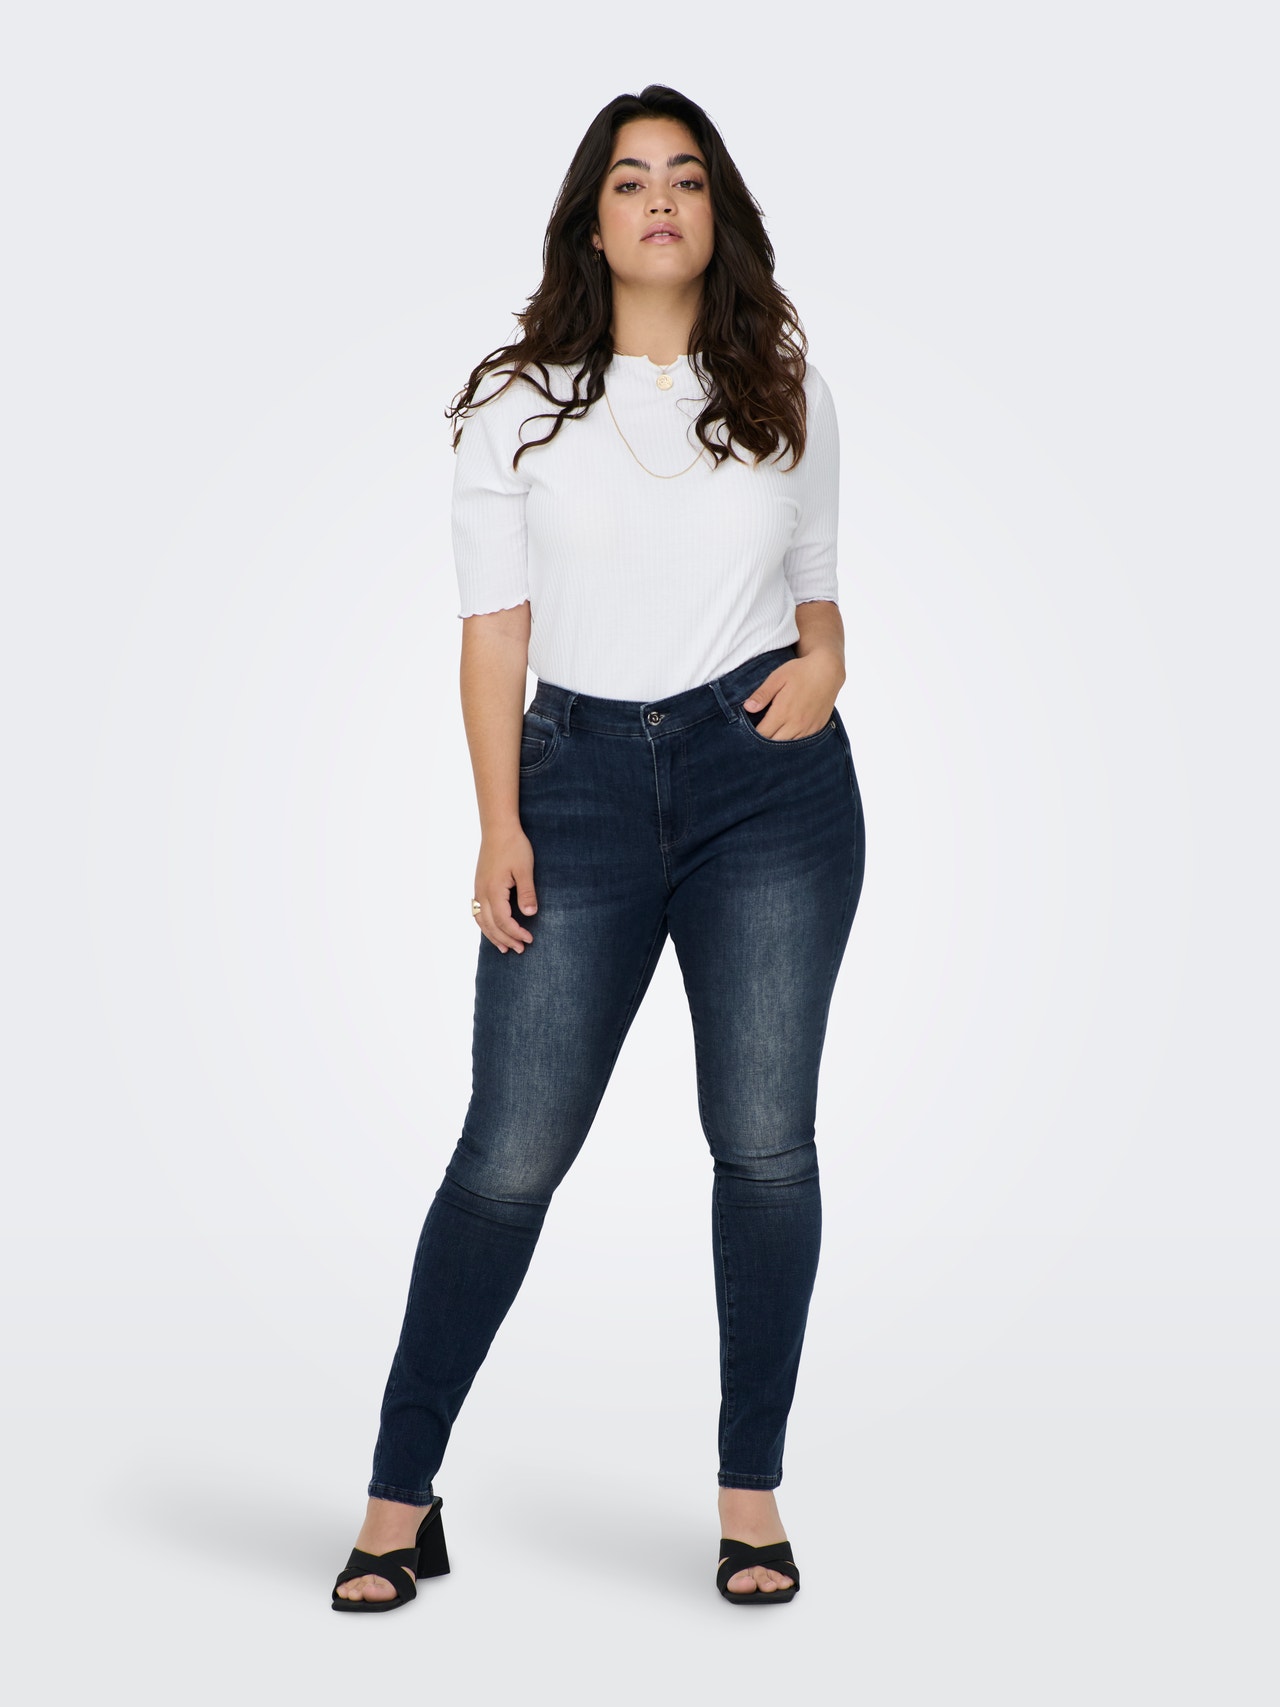 ONLY Jeans Skinny Fit Taille moyenne -Blue Black Denim - 15237849